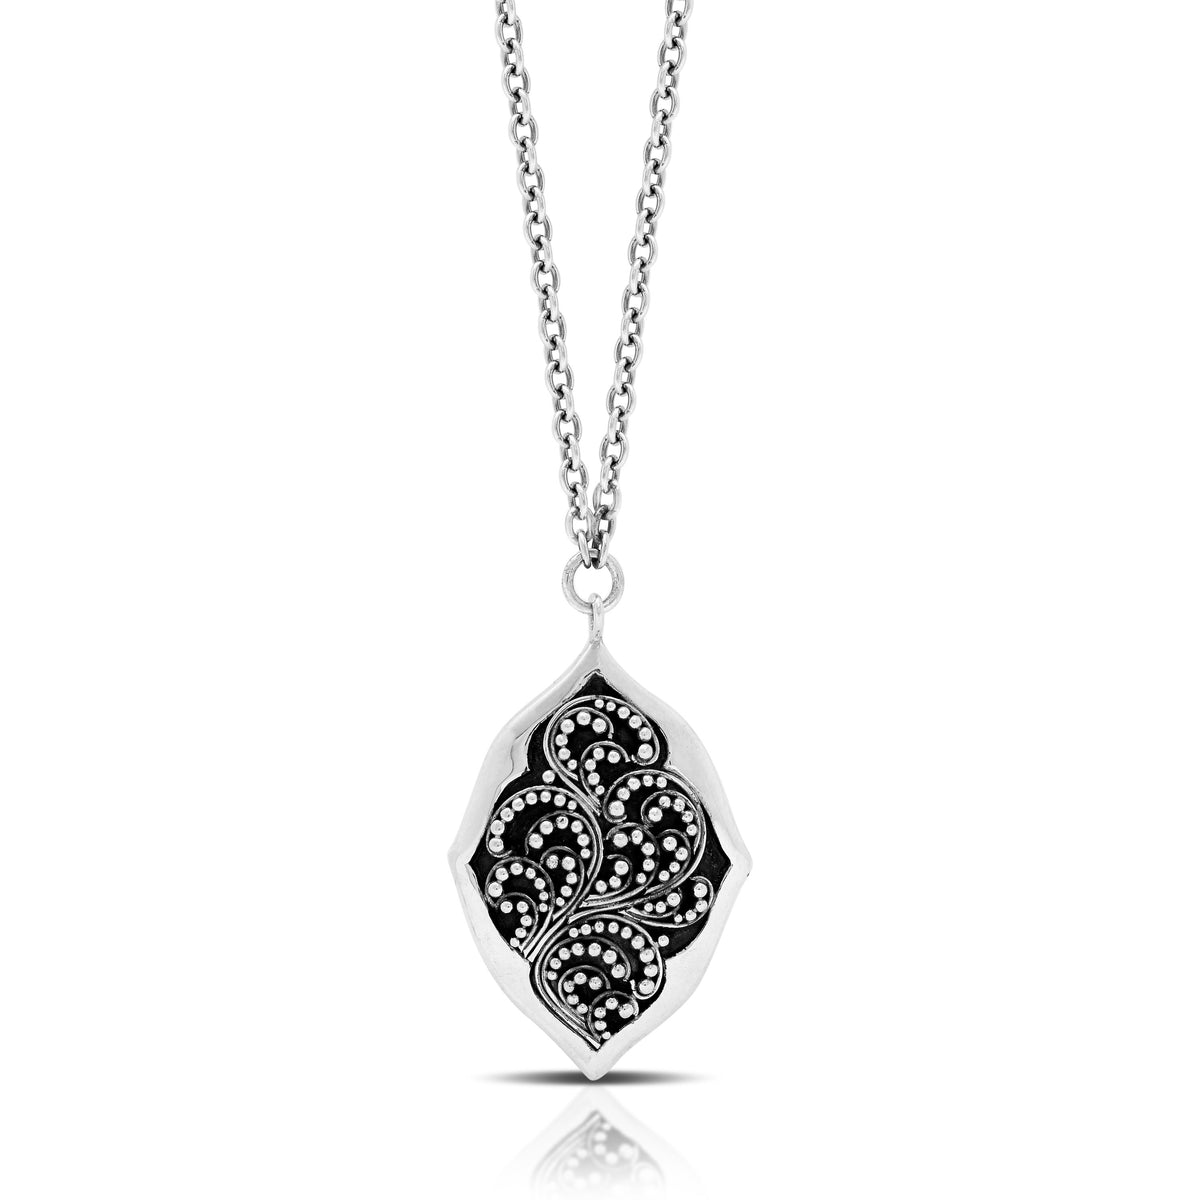 Classic Granulated Marquise Pendant Necklace. 22mm x 32mm Pendant. 17" Chain